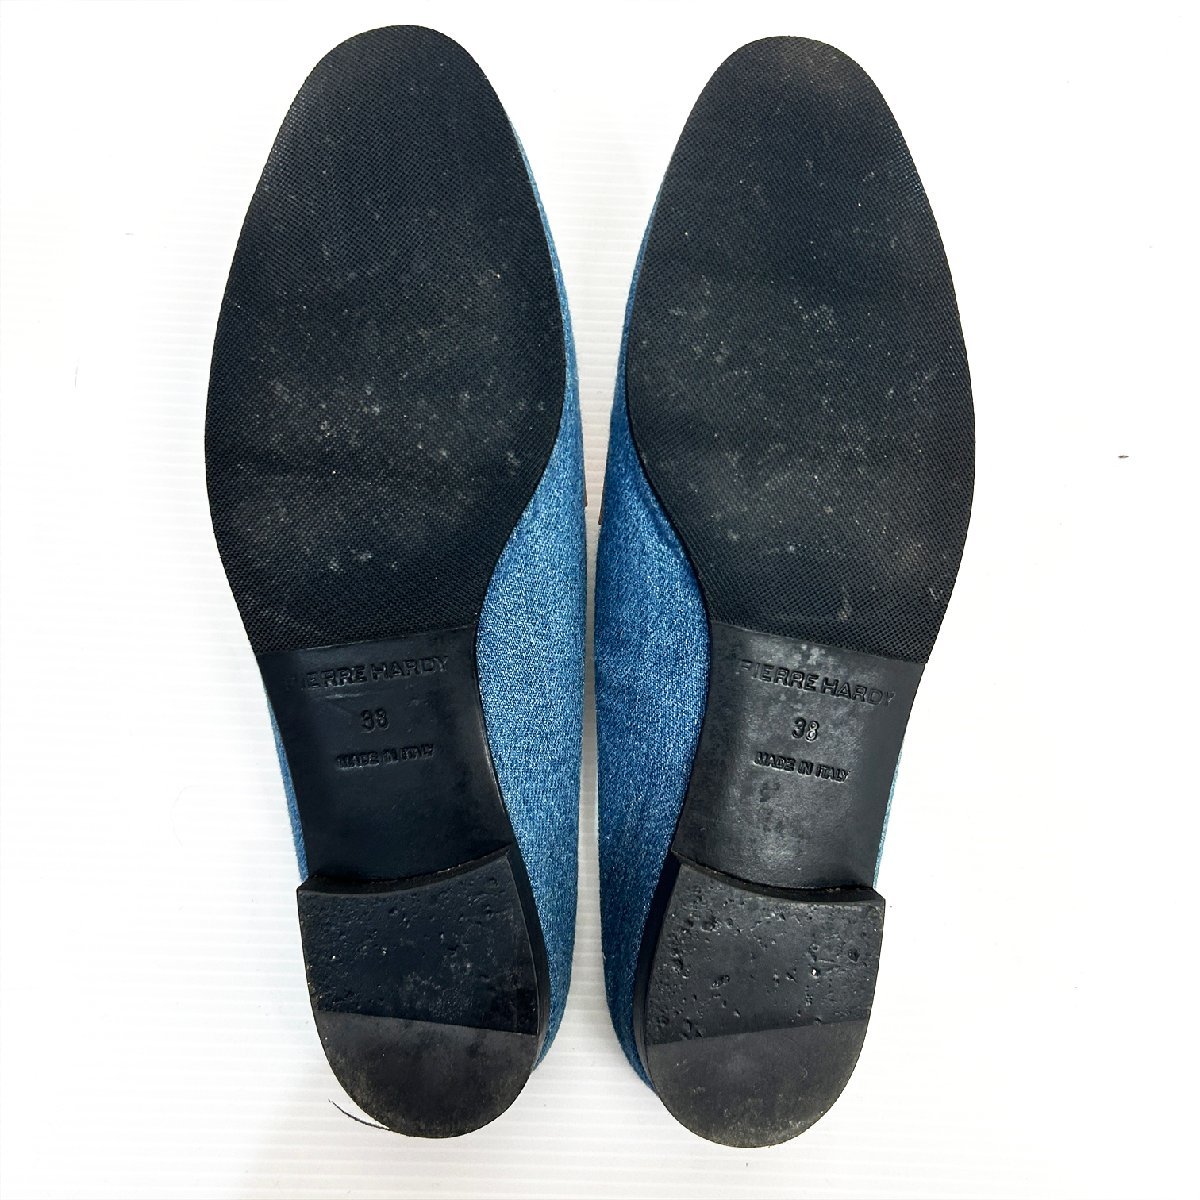 PIERRE HARDY Pierre a Rudy leather Denim slip-on shoes flat shoes size 38 lady's Is3-5